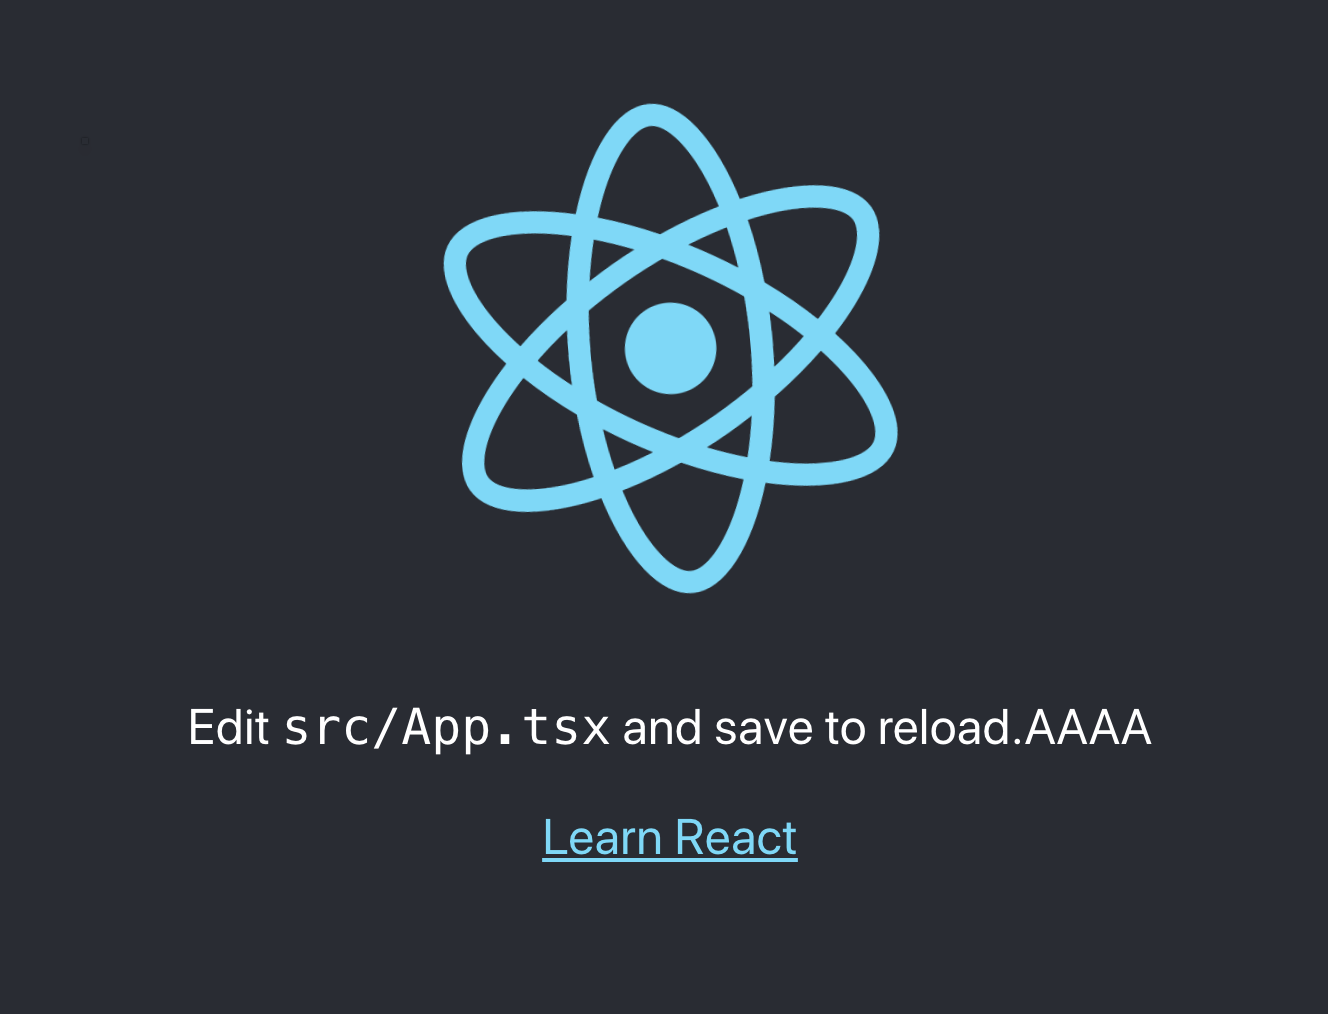 react_start_page_AAAA.png